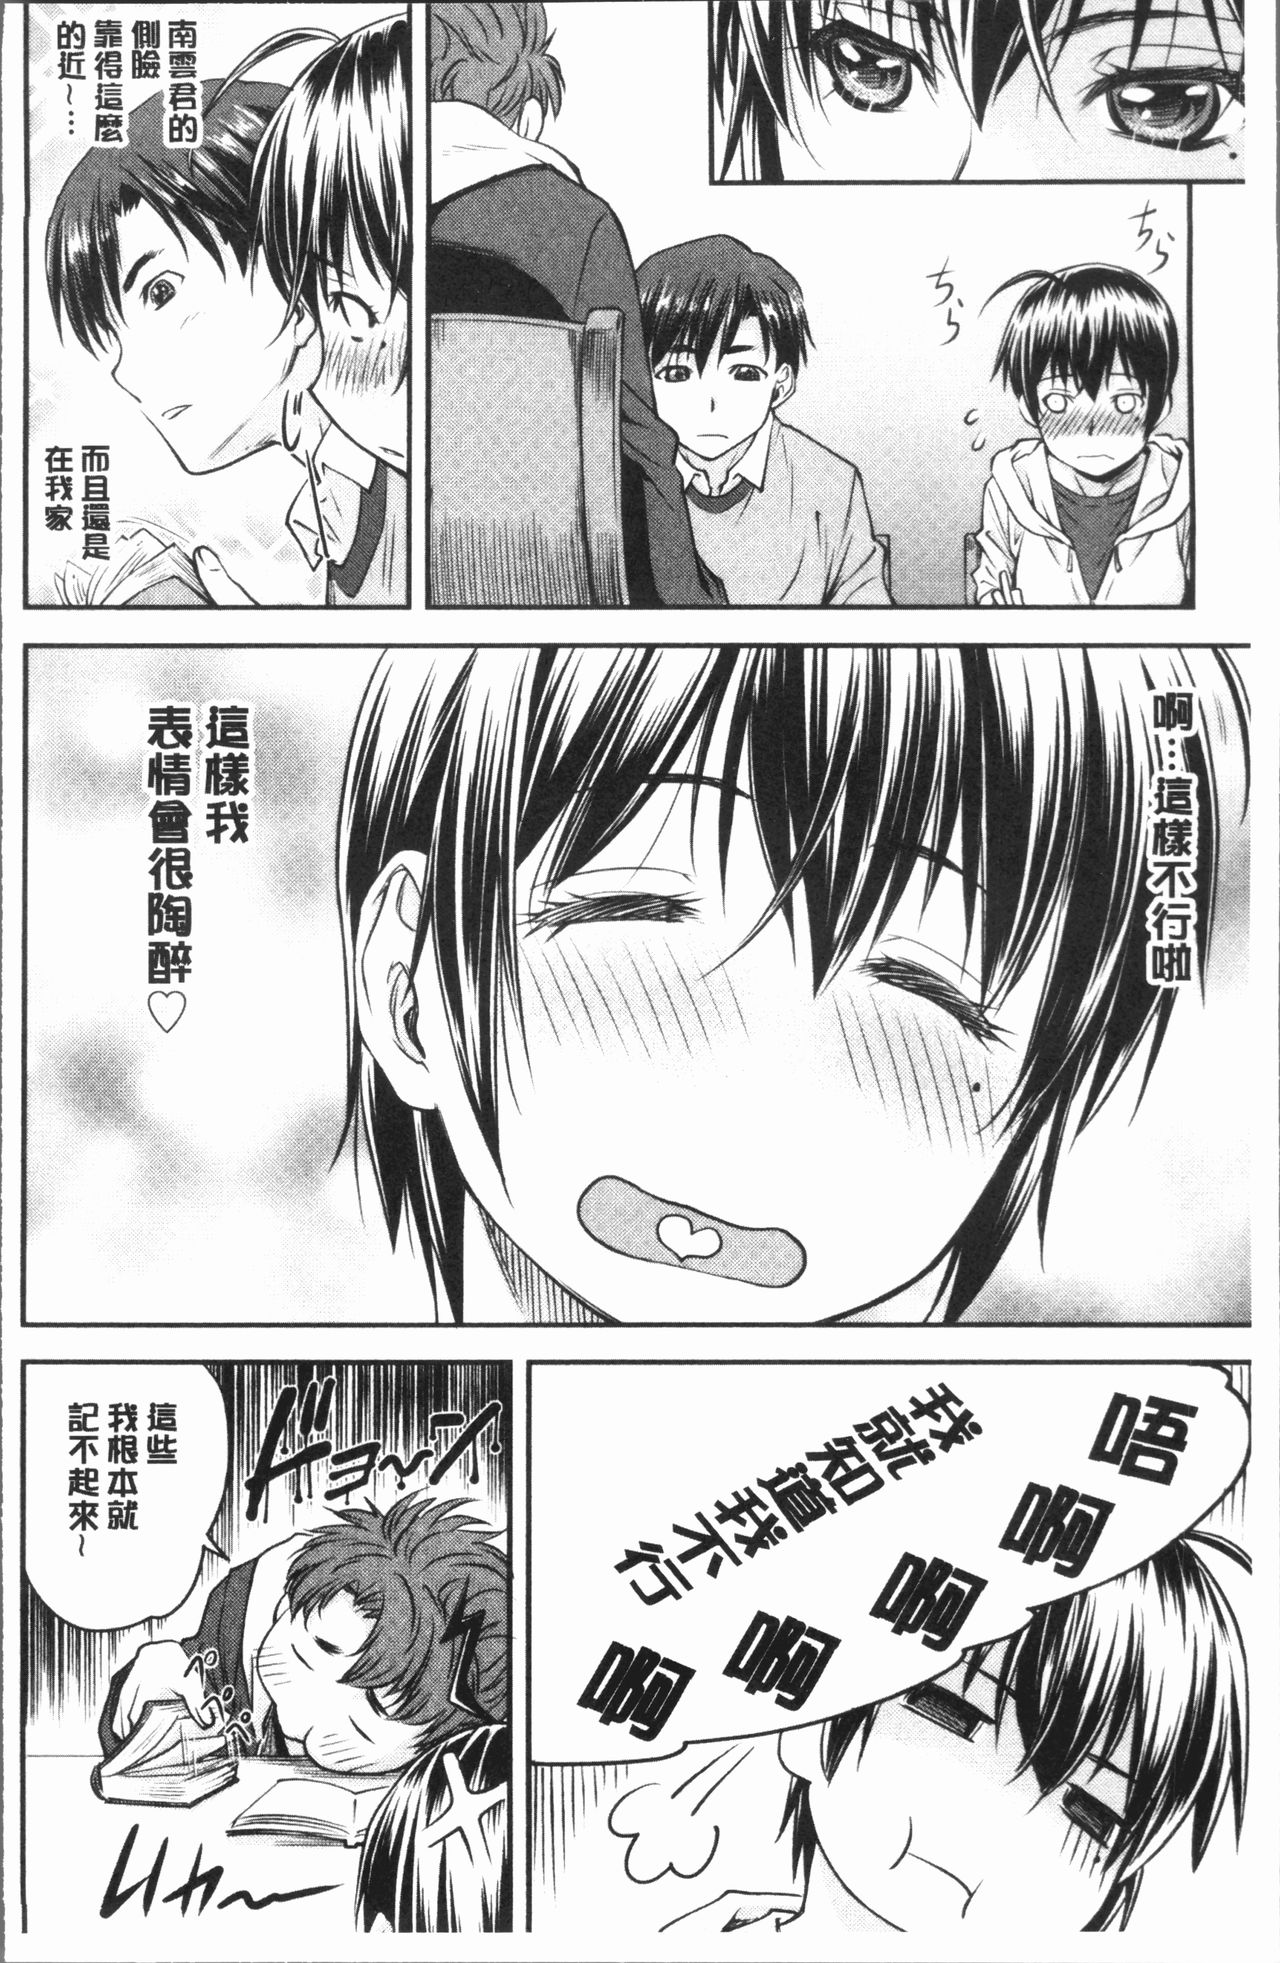 [Nagare Ippon] Kaname Date Jou | 加奈美Date 上 [Chinese] page 14 full